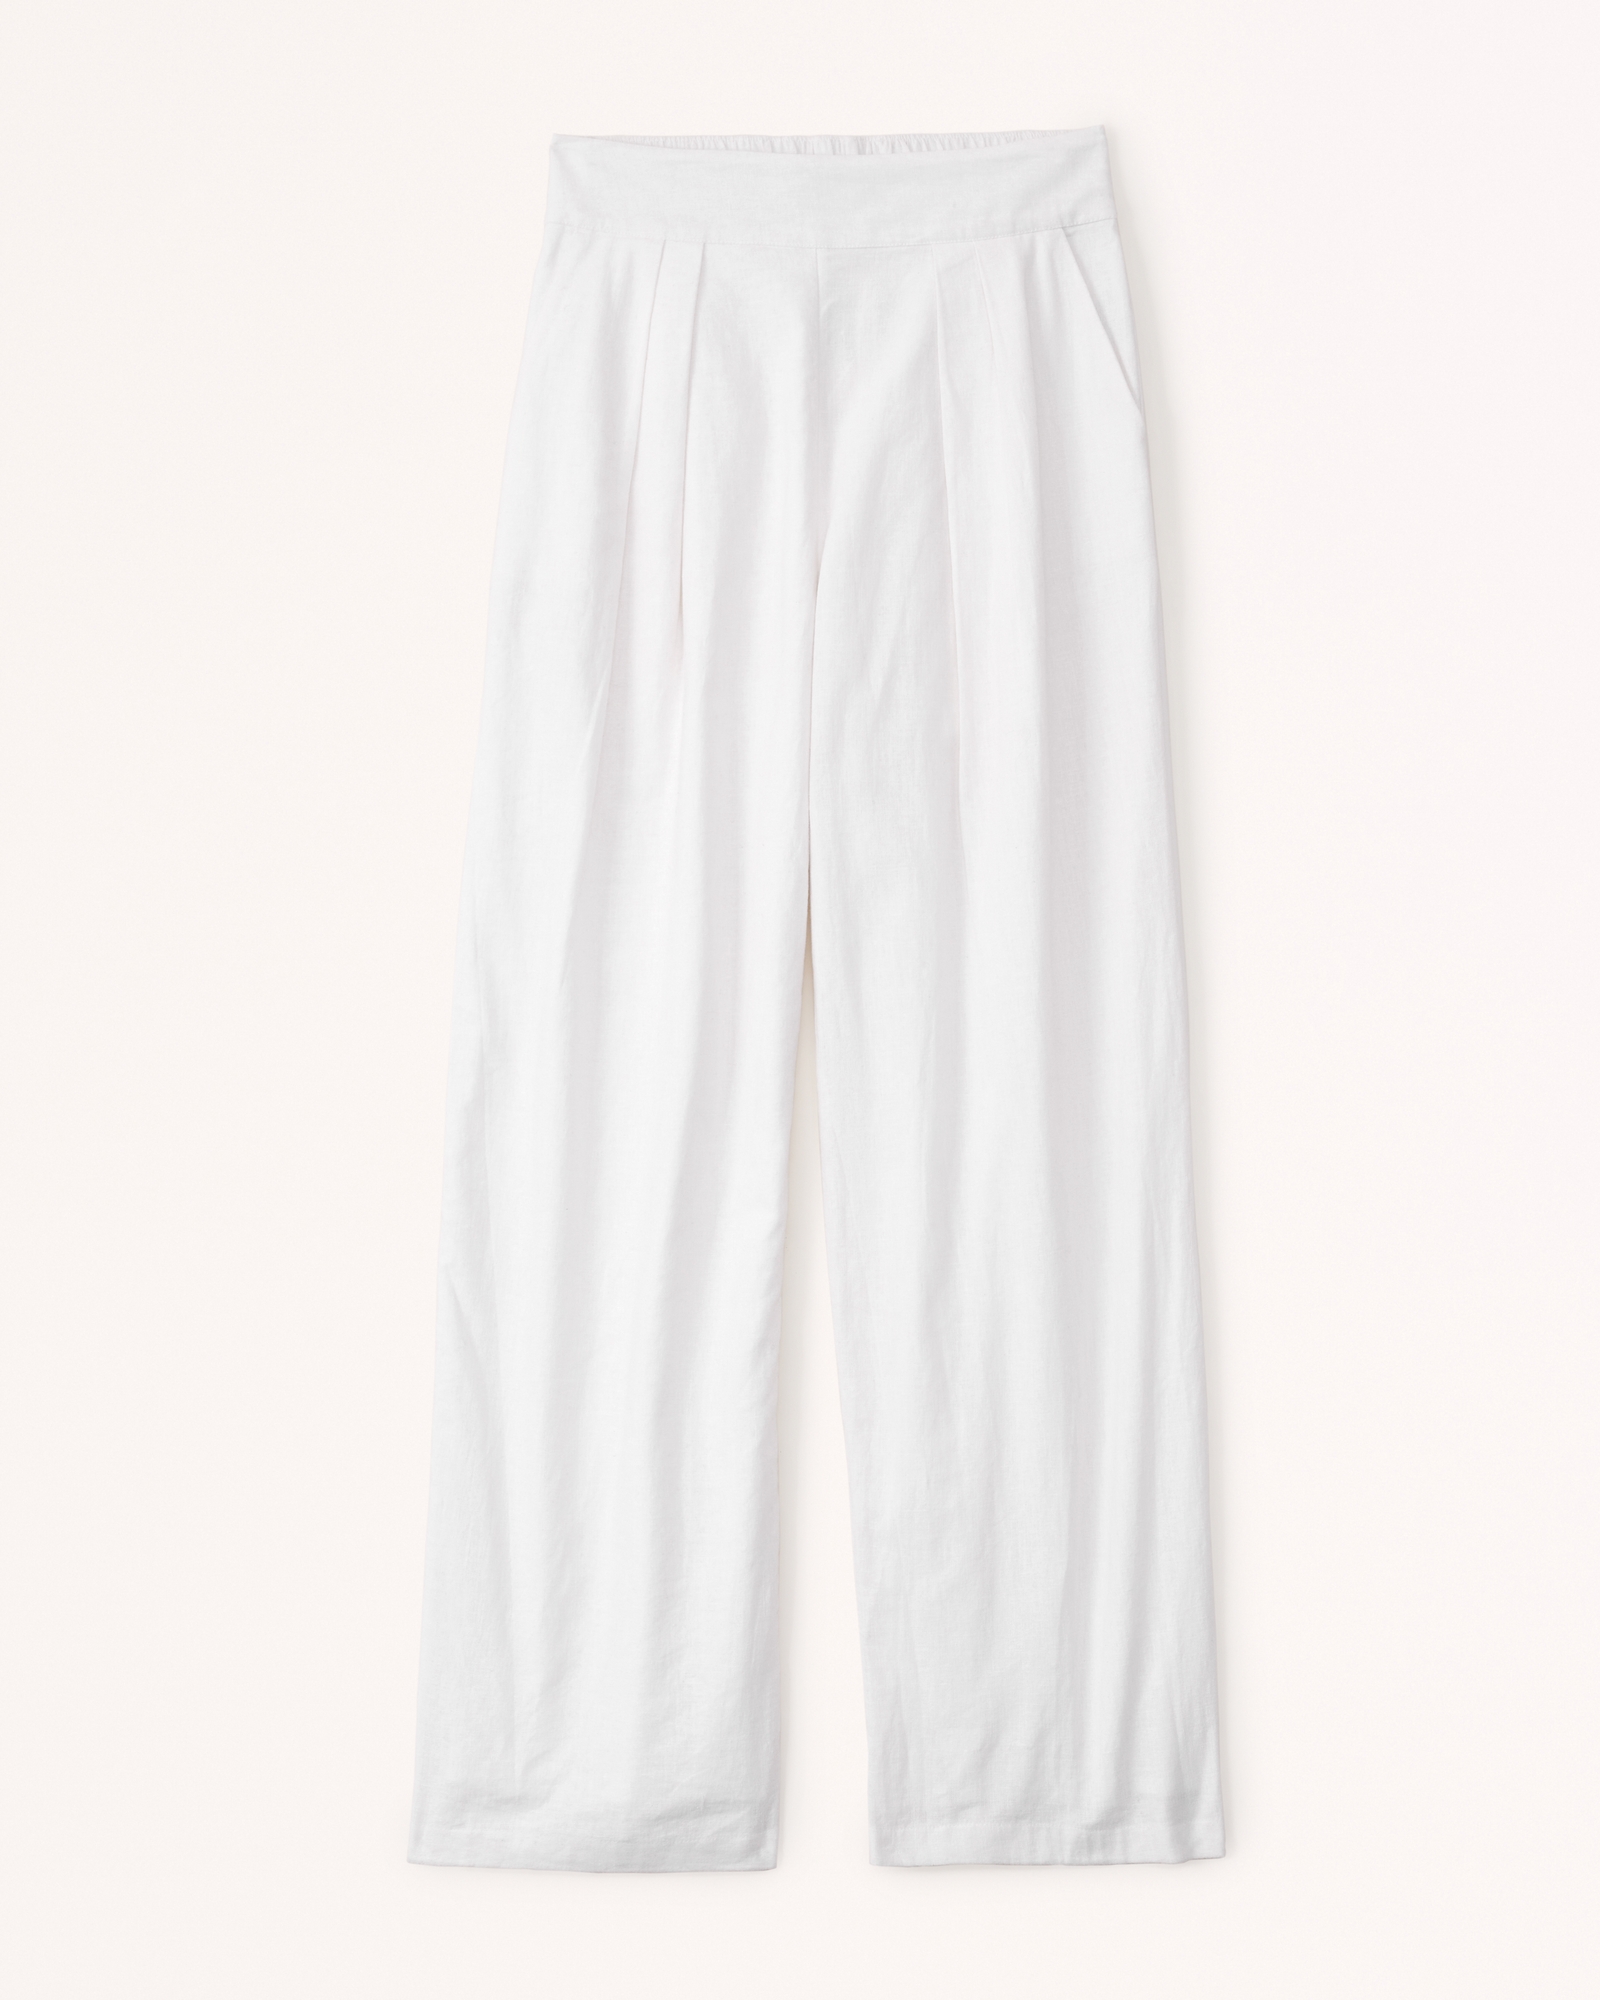 Buy White Palazzo Pant Cotton for Best Price, Reviews, Free Shipping